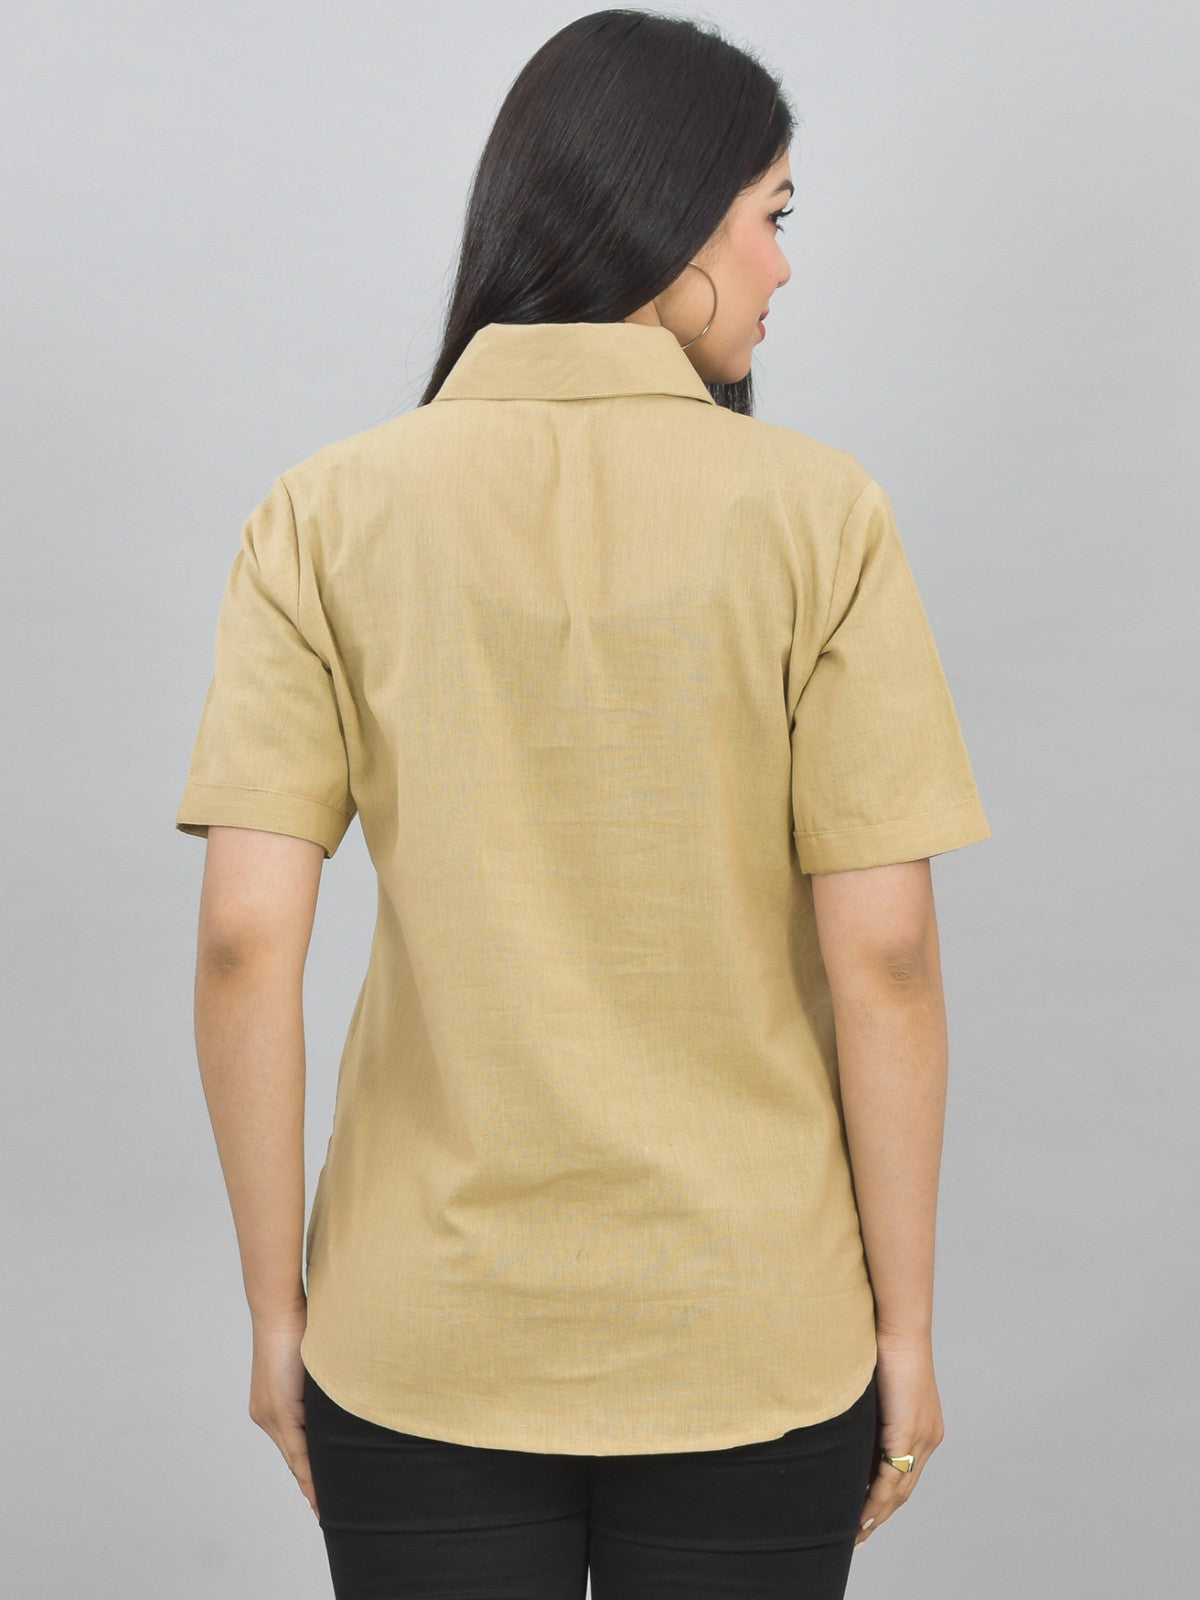 Pack Of 2 Womens Solid Beige And Brown Half Sleeve Cotton Shirts Combo